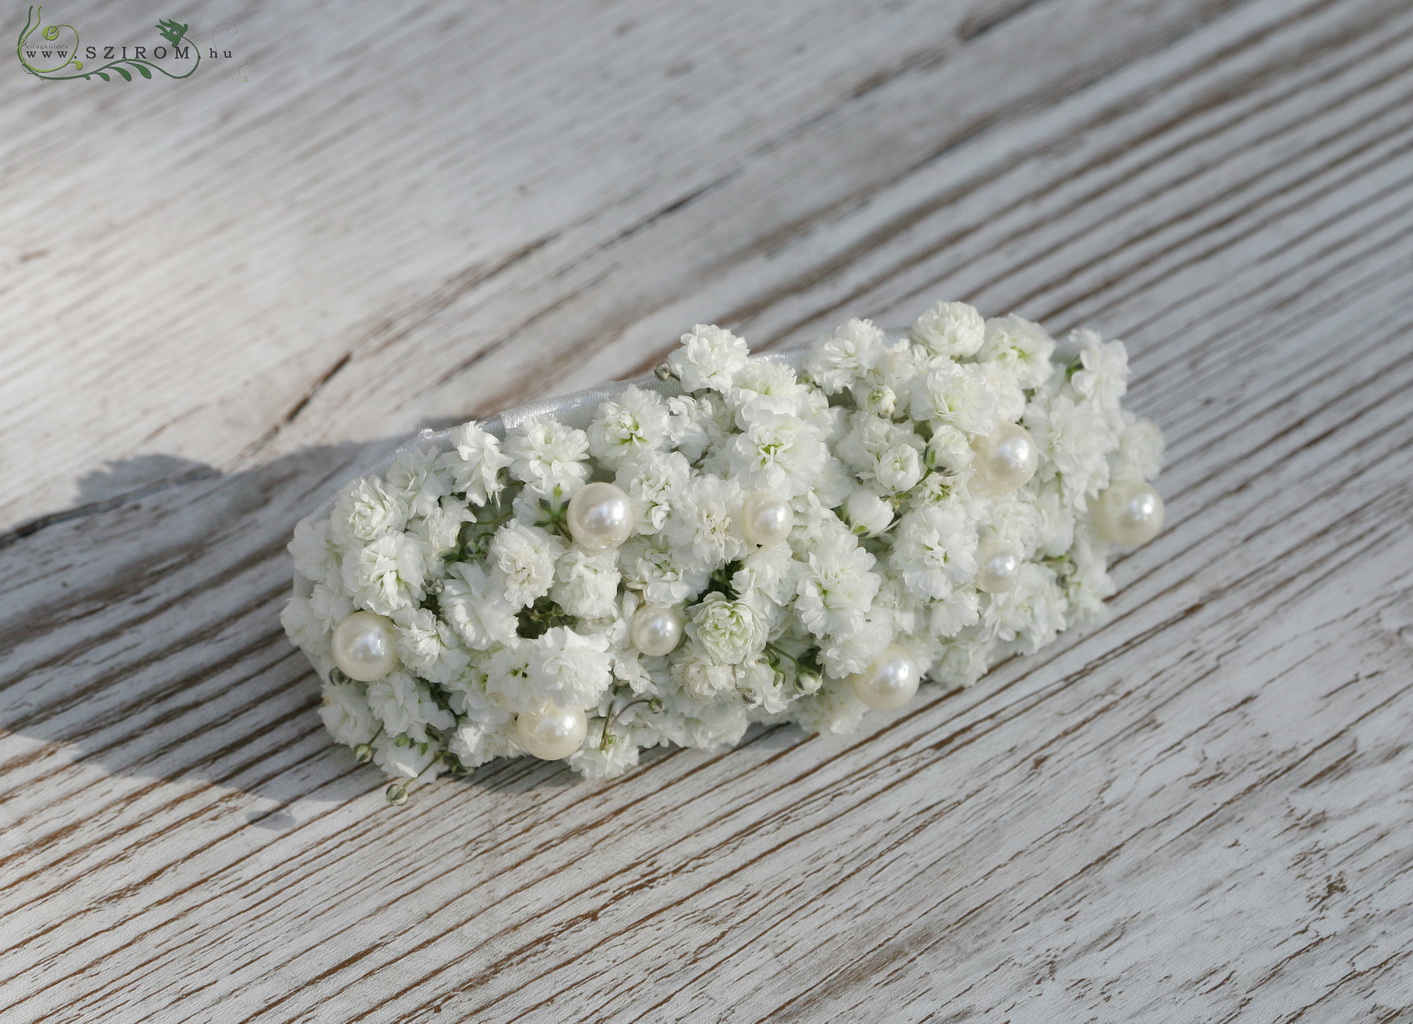 flower delivery Budapest - wrist corsage made of baby's breath (white)